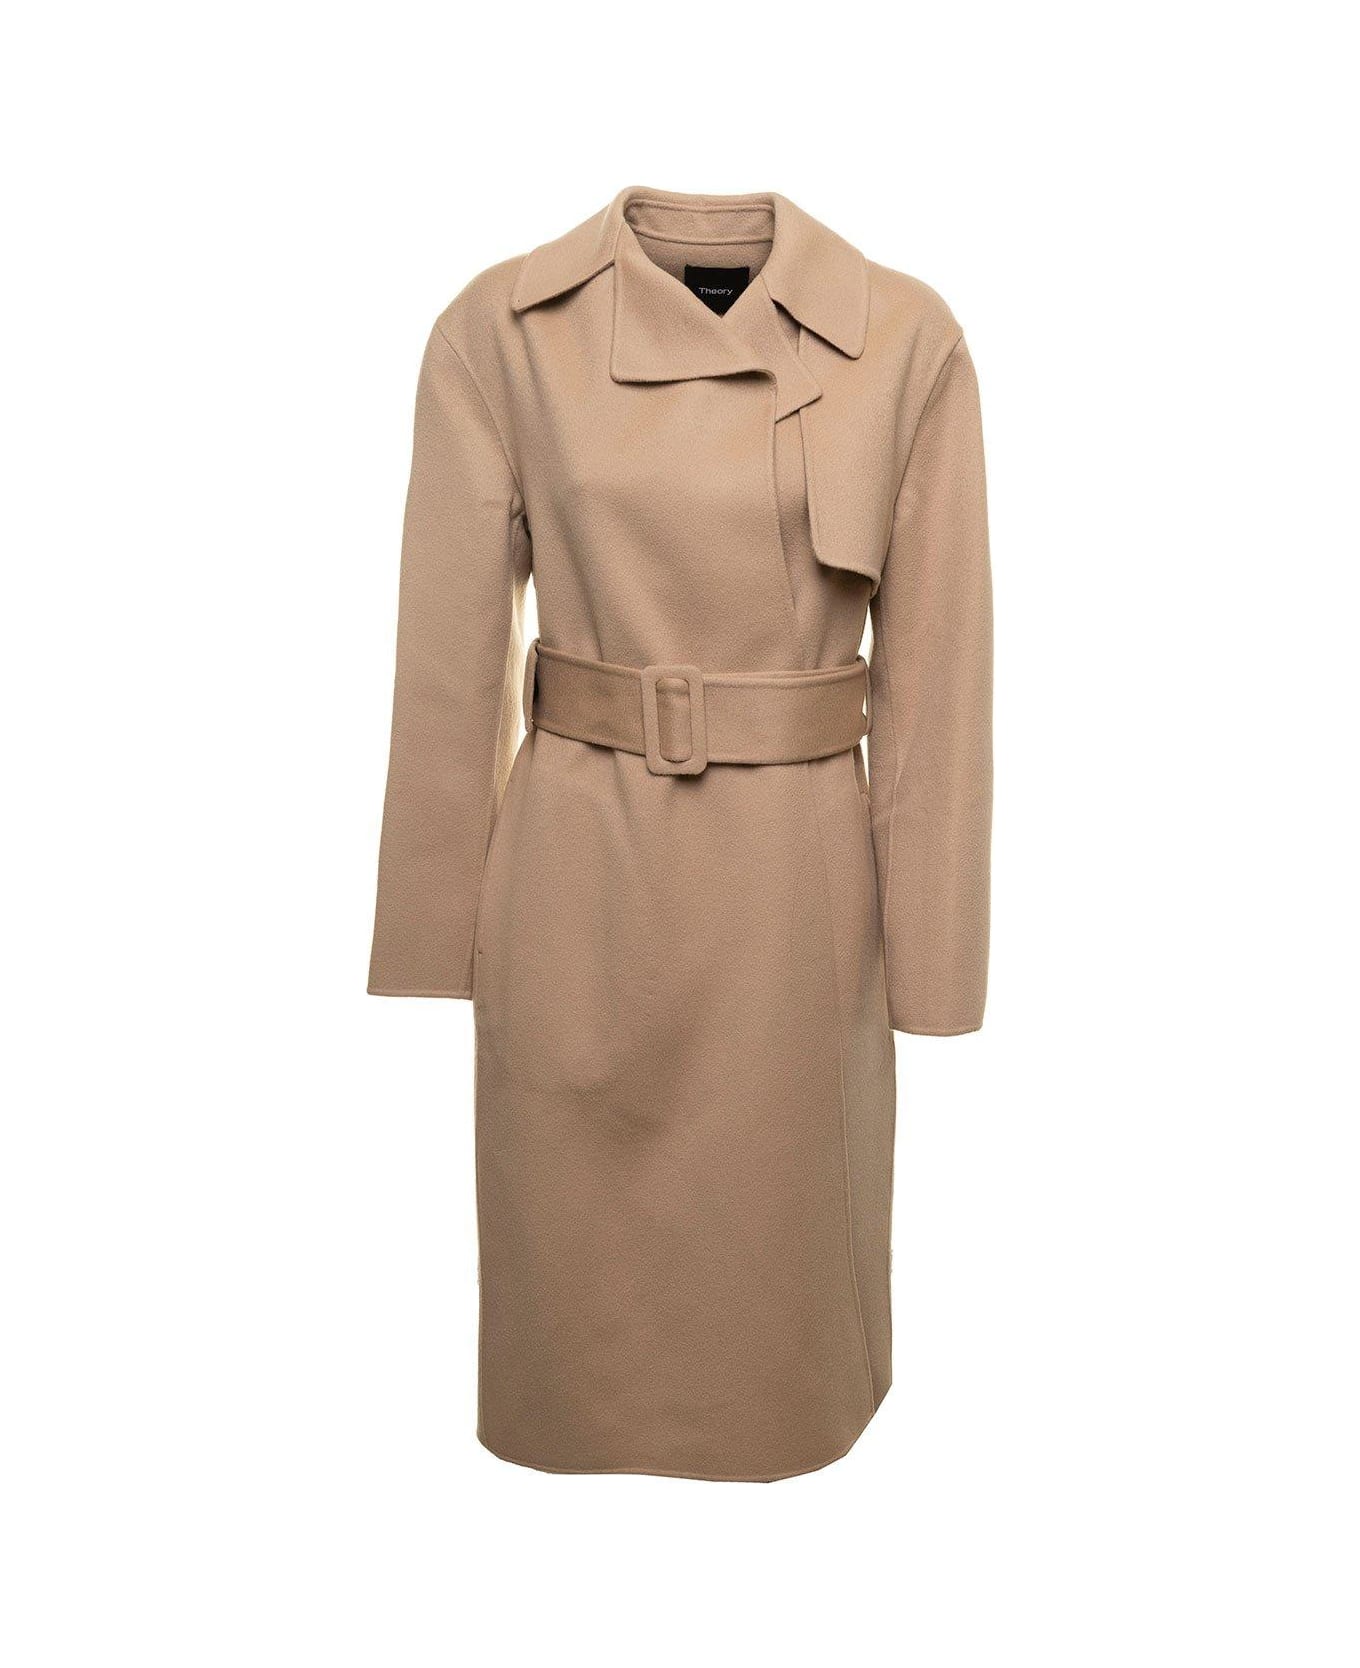 Theory Belted Straight Hem Coat - BROWN